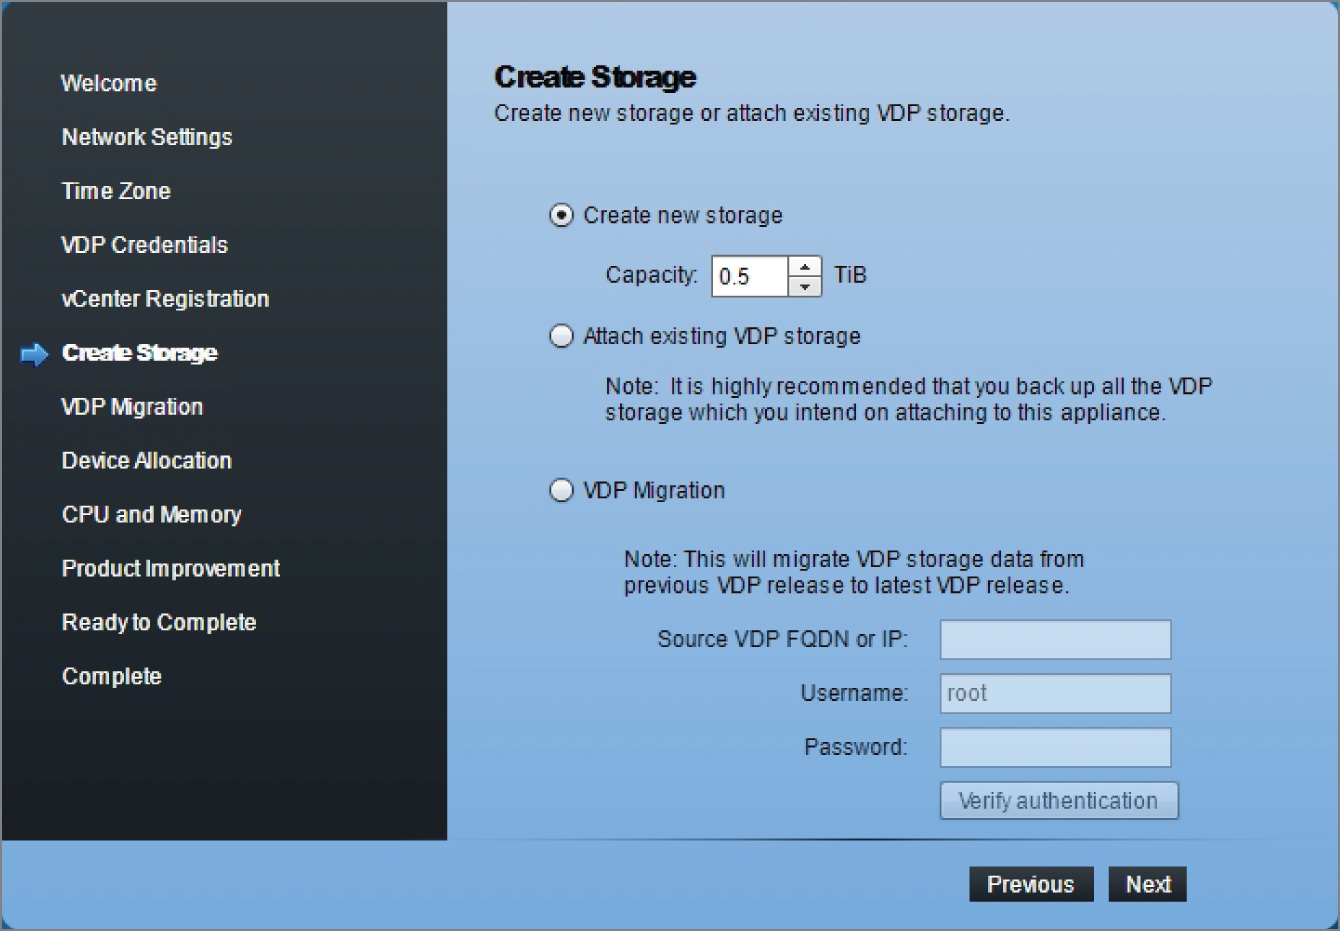 Snapshot of creating the storage for VDP.